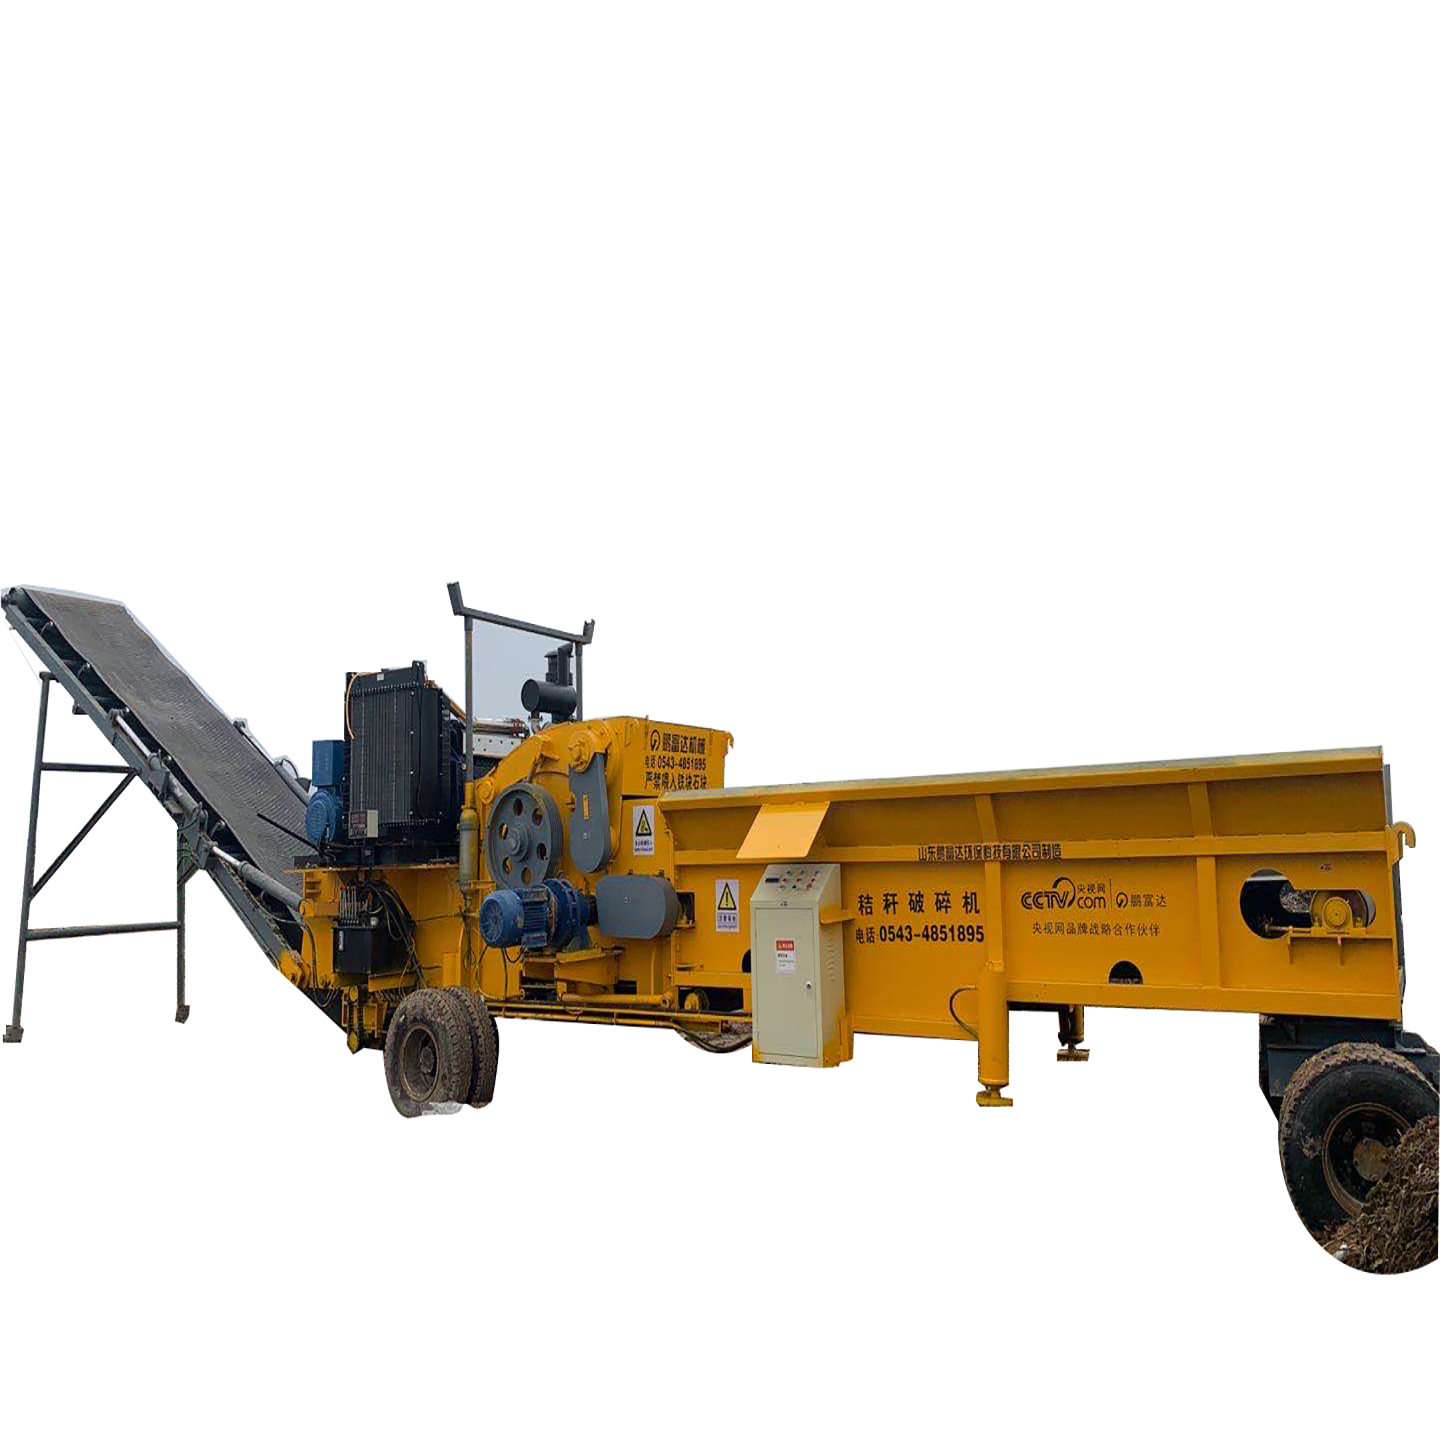 Biomass Shredders For Waste Crops FD1400-500 Featured Image